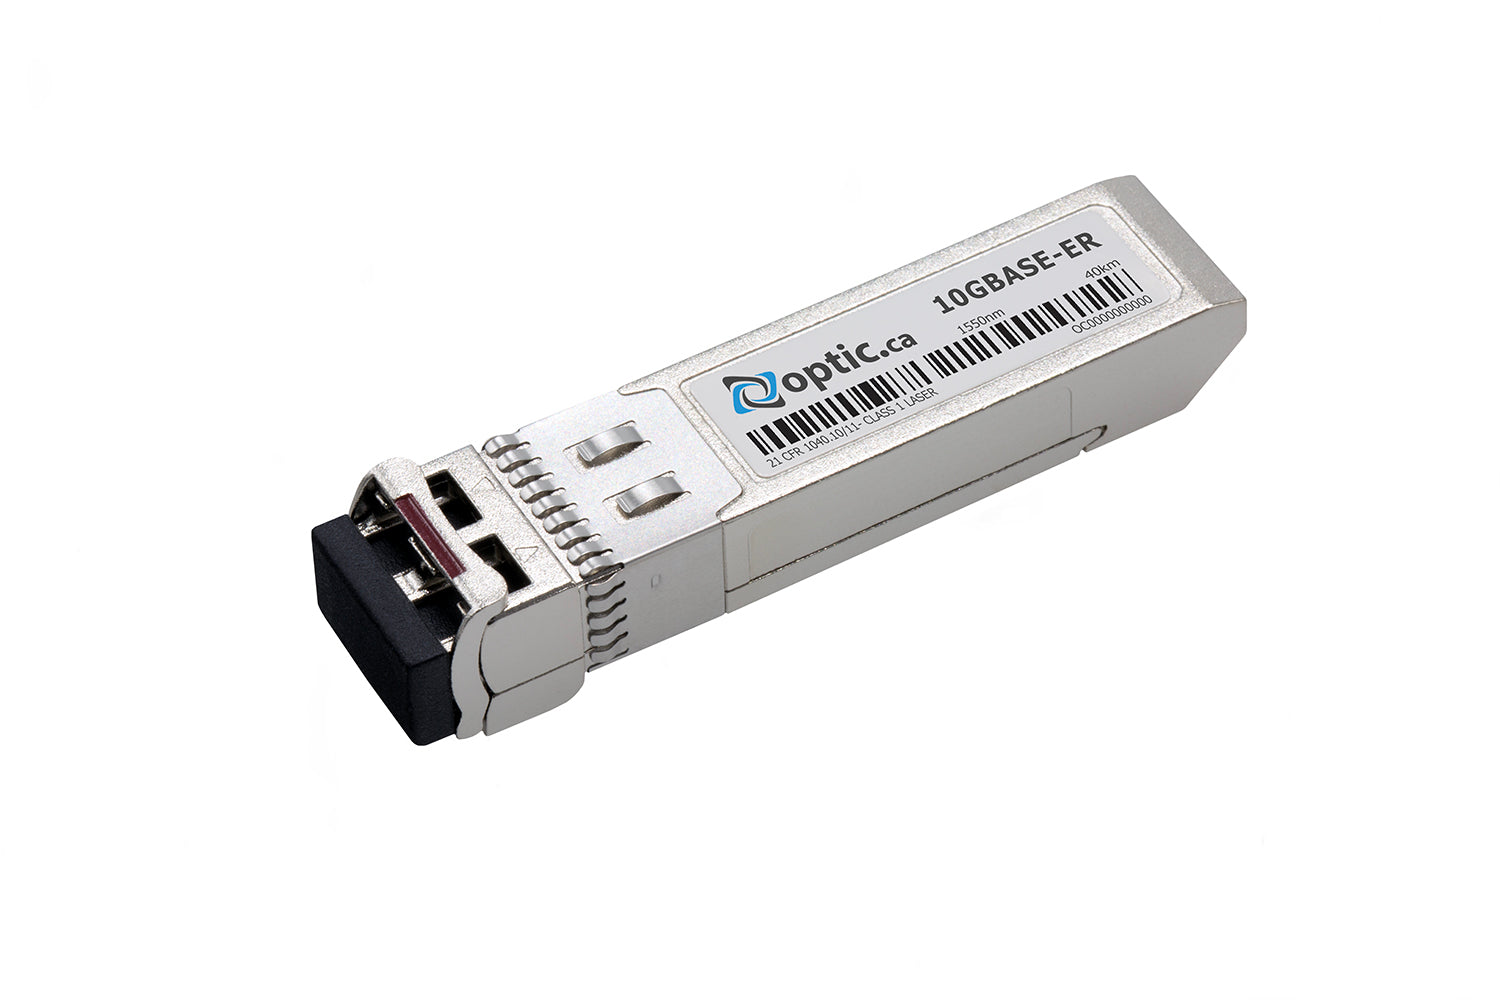 OPTIC.CA - 10GBASE-ER SFP+ - 430-4585-OC - DELL COMPATIBLE